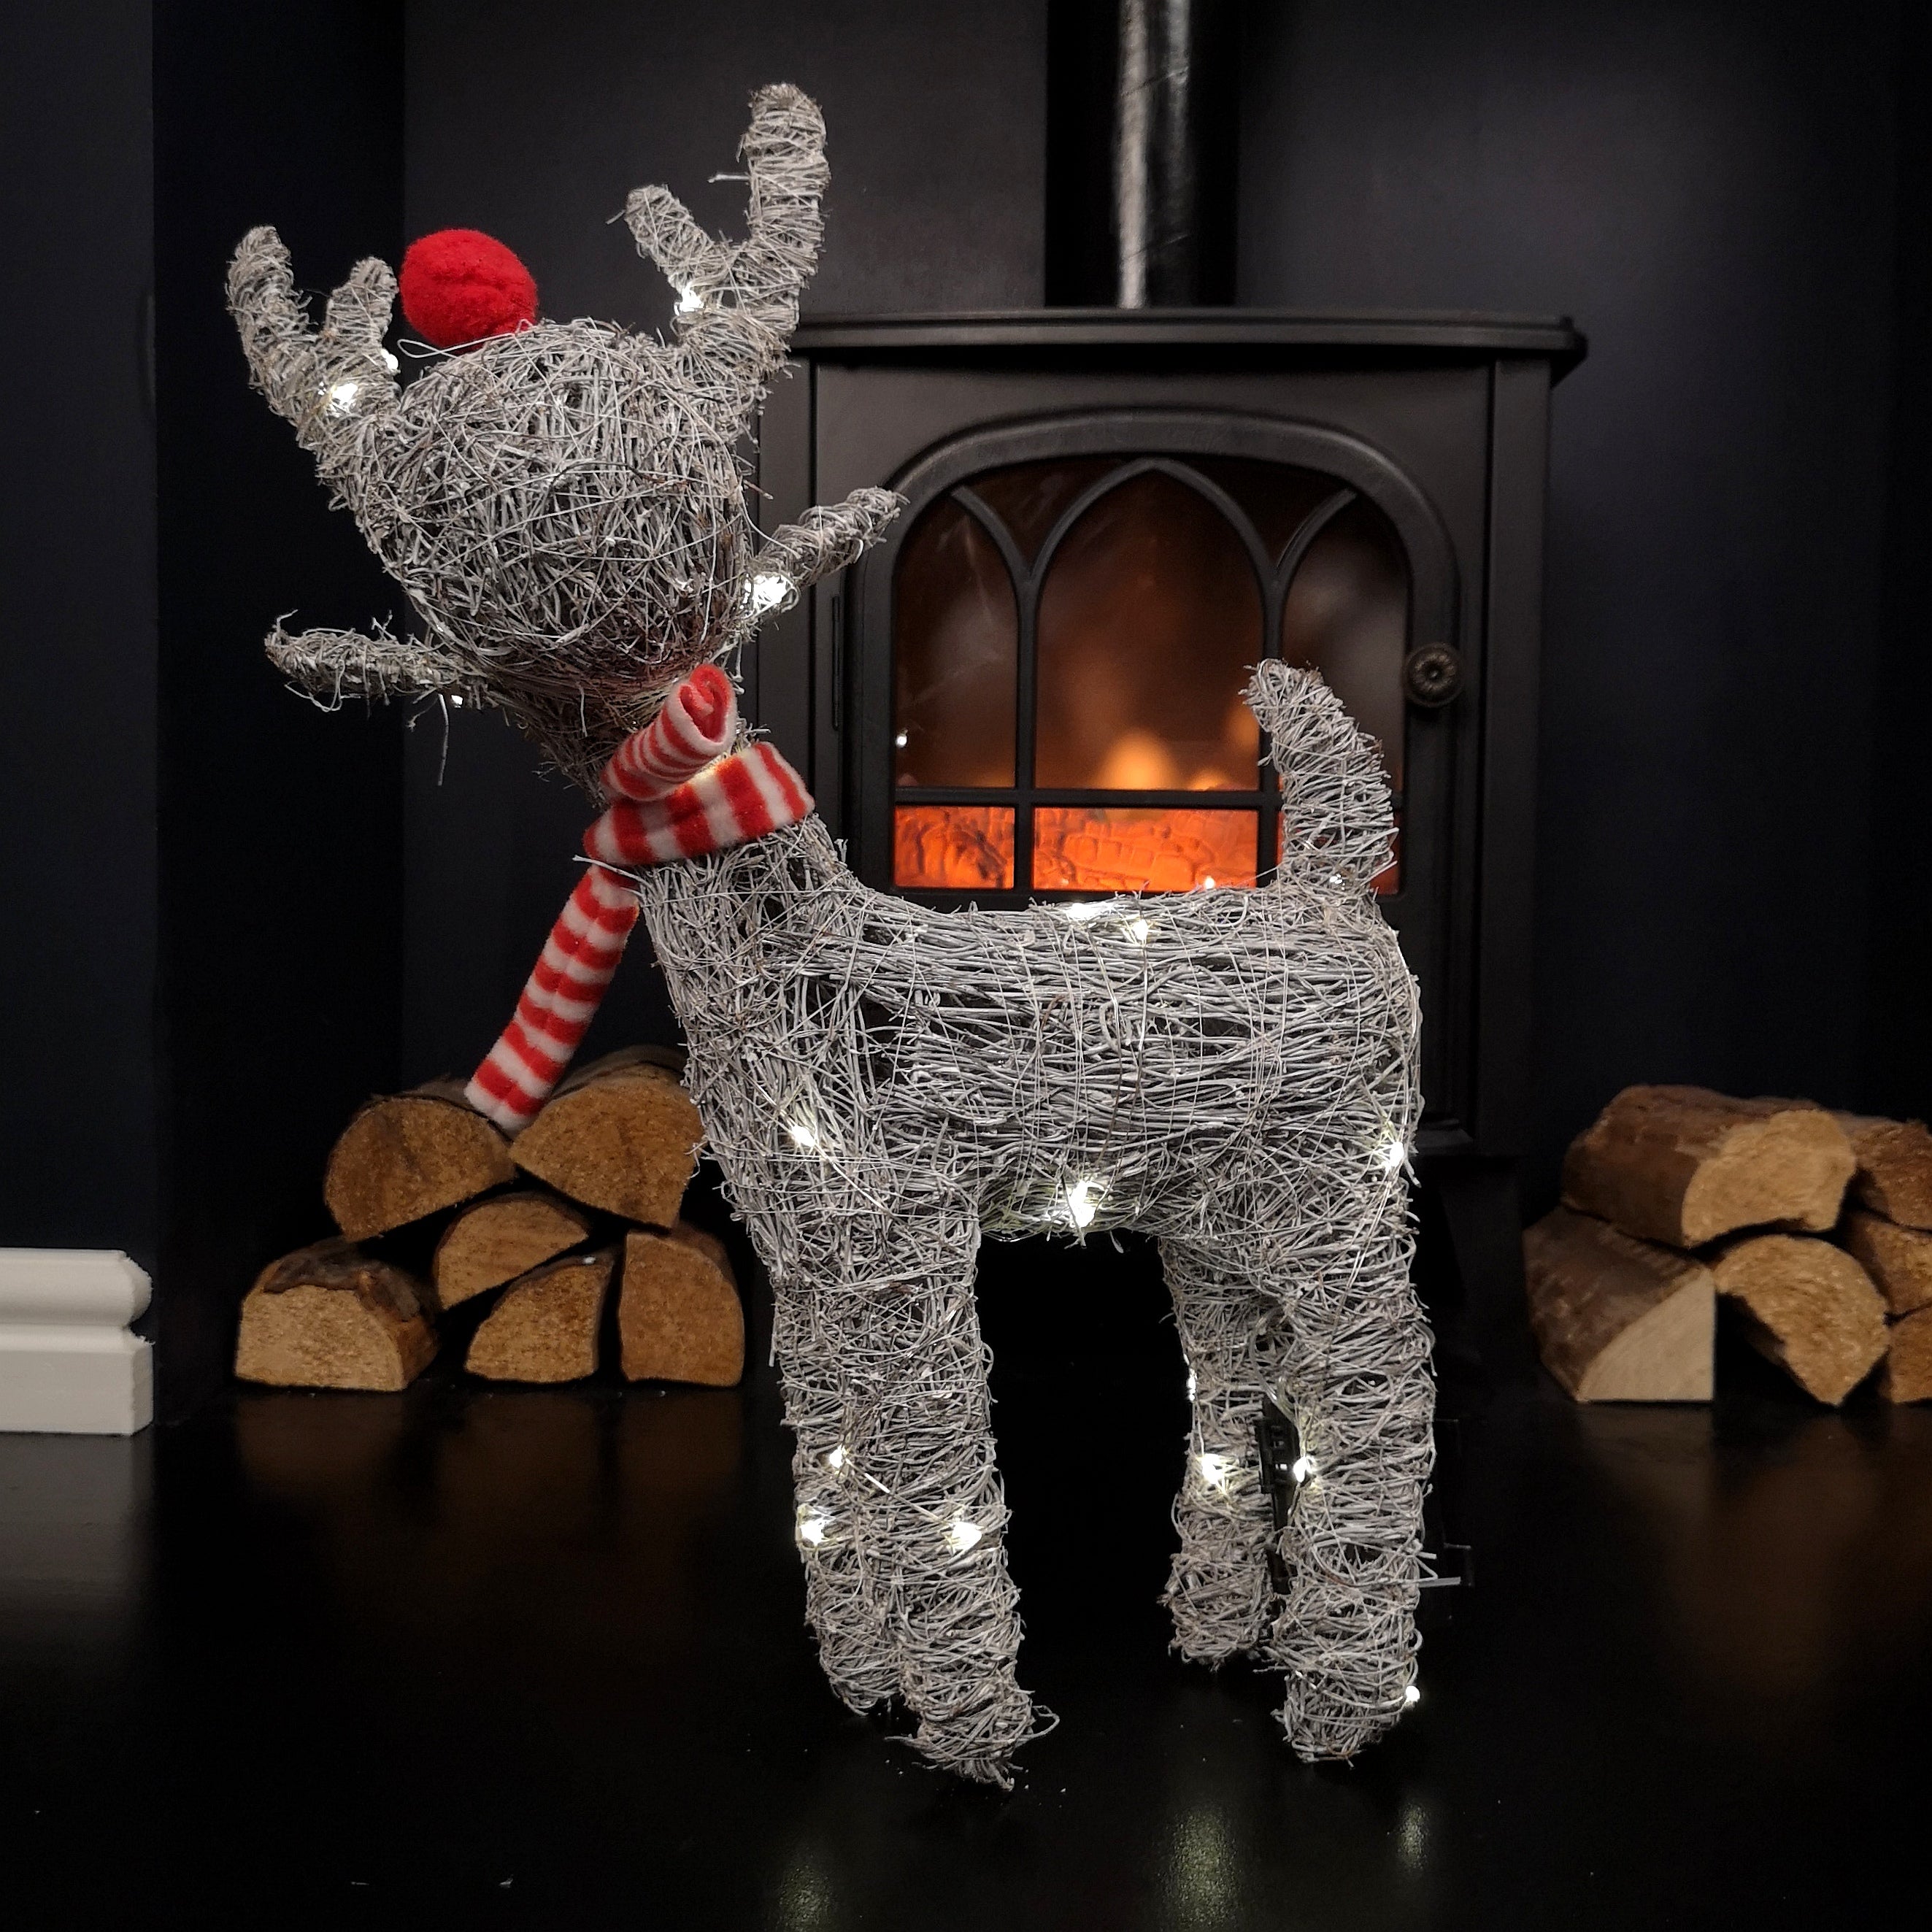 51cm Battery Operated Rattan Woven Blitzen Reindeer with Warm White LEDs